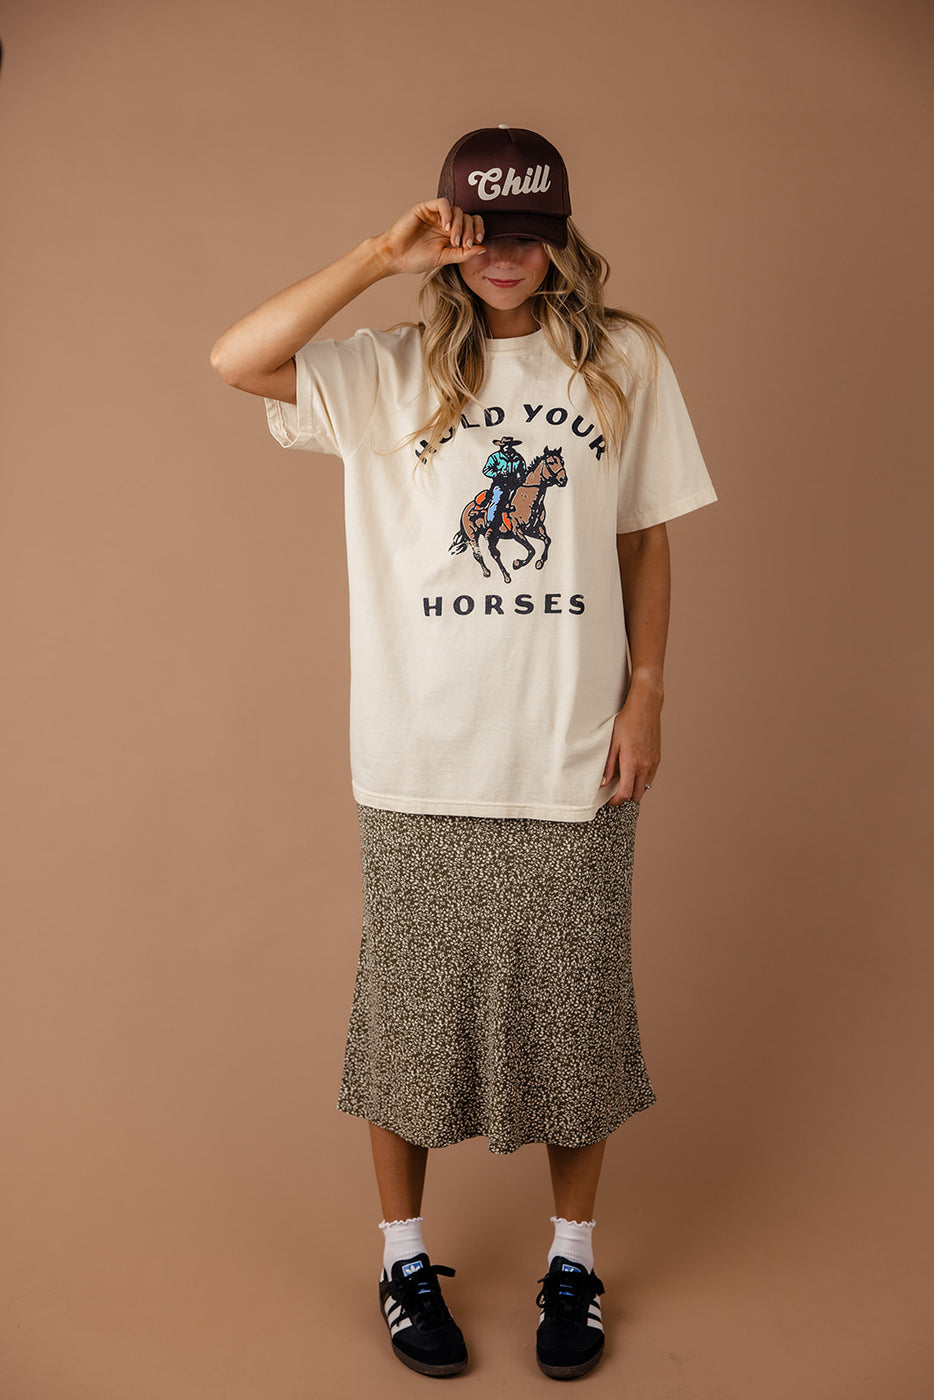 a woman wearing a hat and a t-shirt